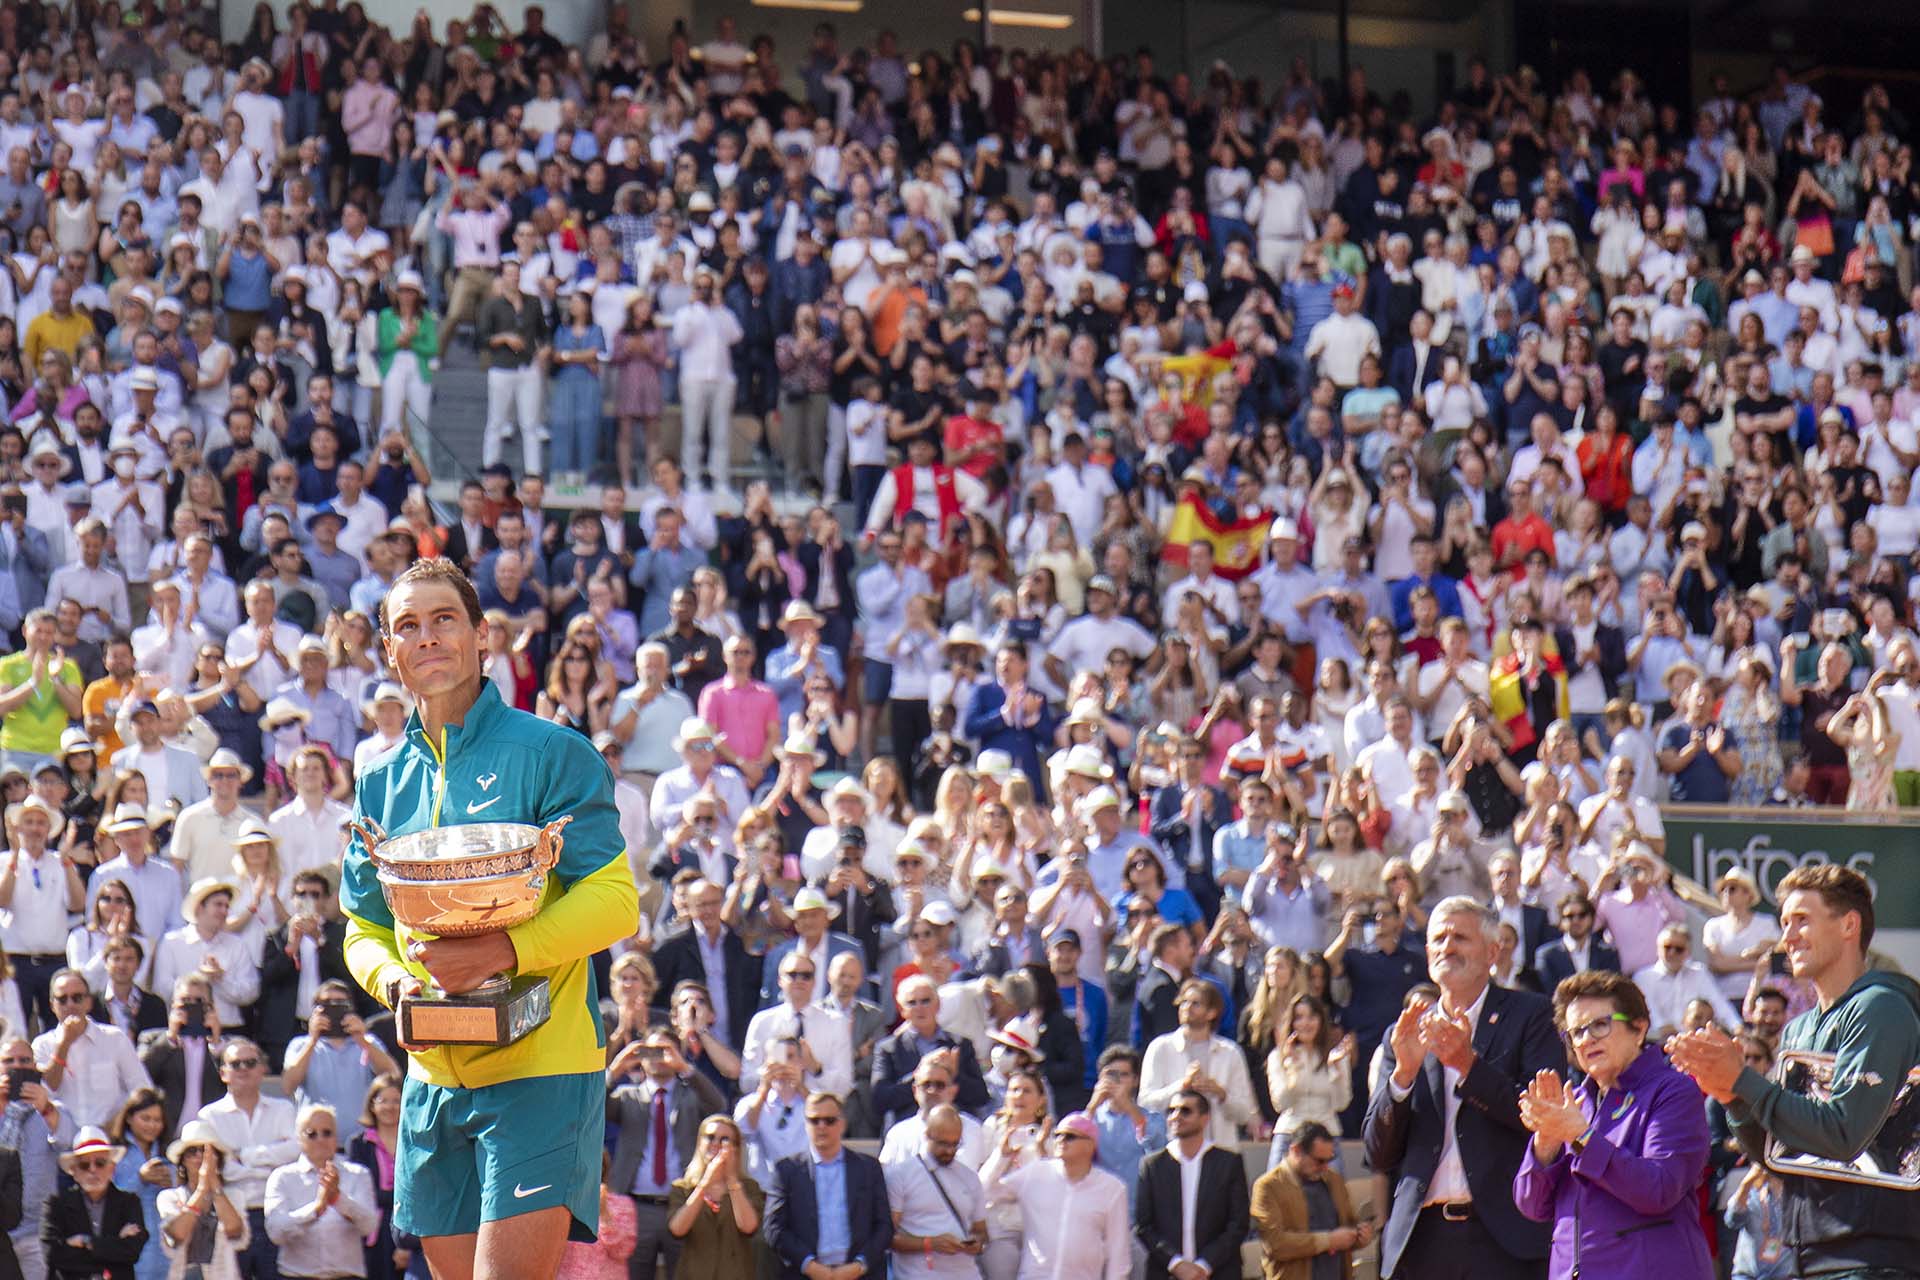 PARIS, FRANCE JUNE 5.  Rafael Nadal of Spain with the winners trophy watched by French Tennis Federation President Gilles Moretton, Billie Jean King and Casper Rudd after his victory against Casper Rudd of Norway during the Singles Final for Men on Court Philippe Chatrier at the 2022 French Open Tennis Tournament at Roland Garros on June 5th 2022 in Paris, France. (Photo by Tim Clayton/Corbis via Getty Images)